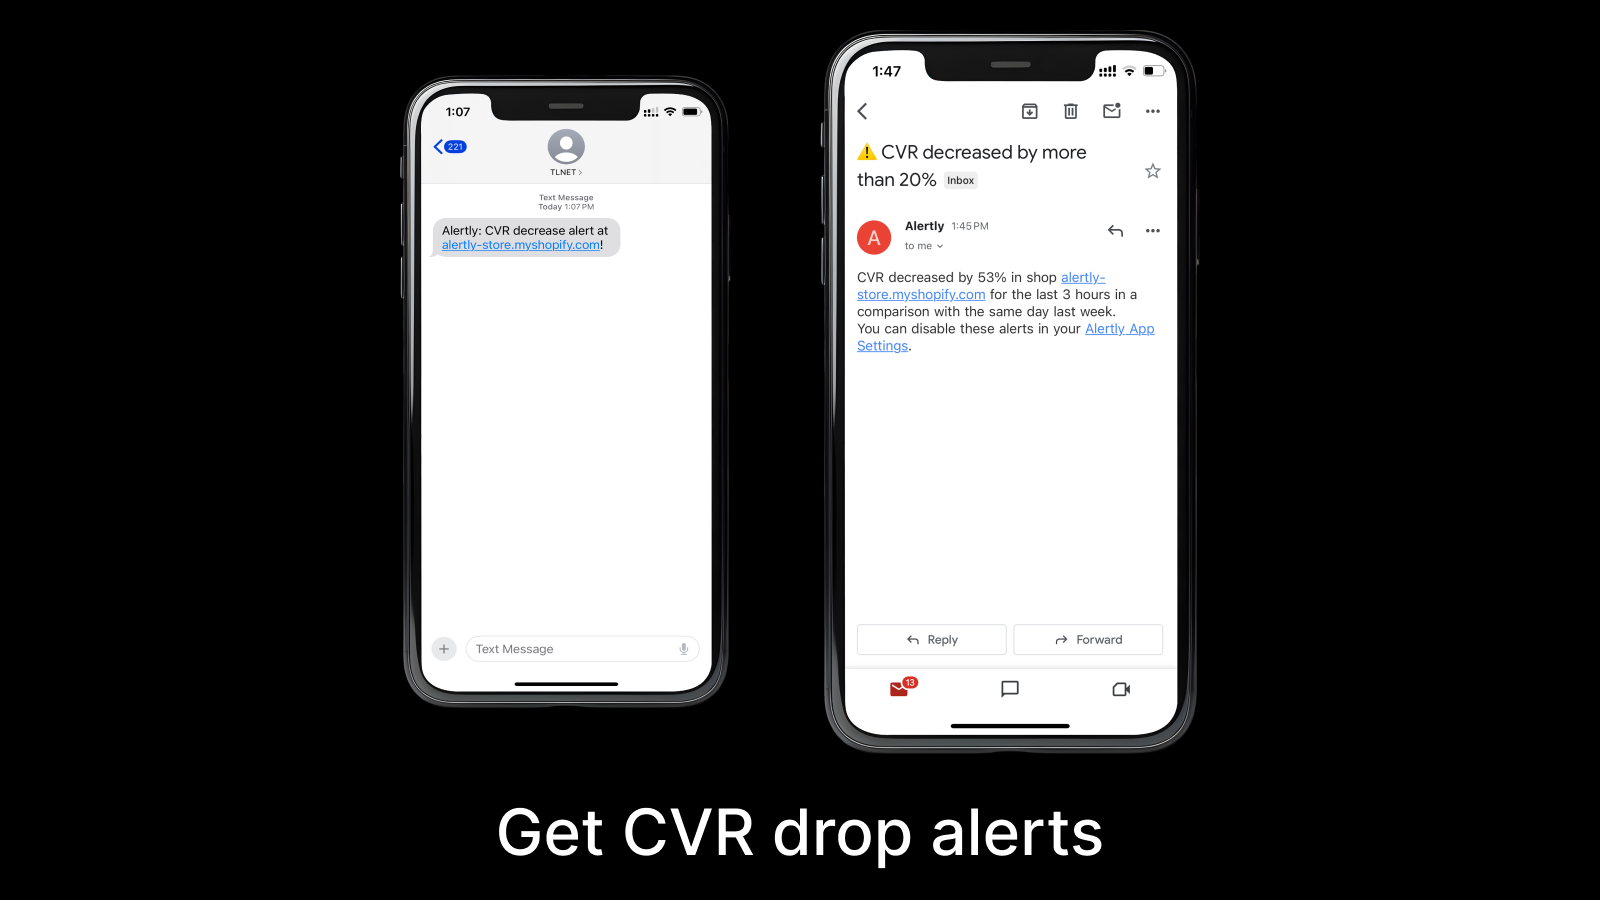 Alertly app SMS and Email alerts